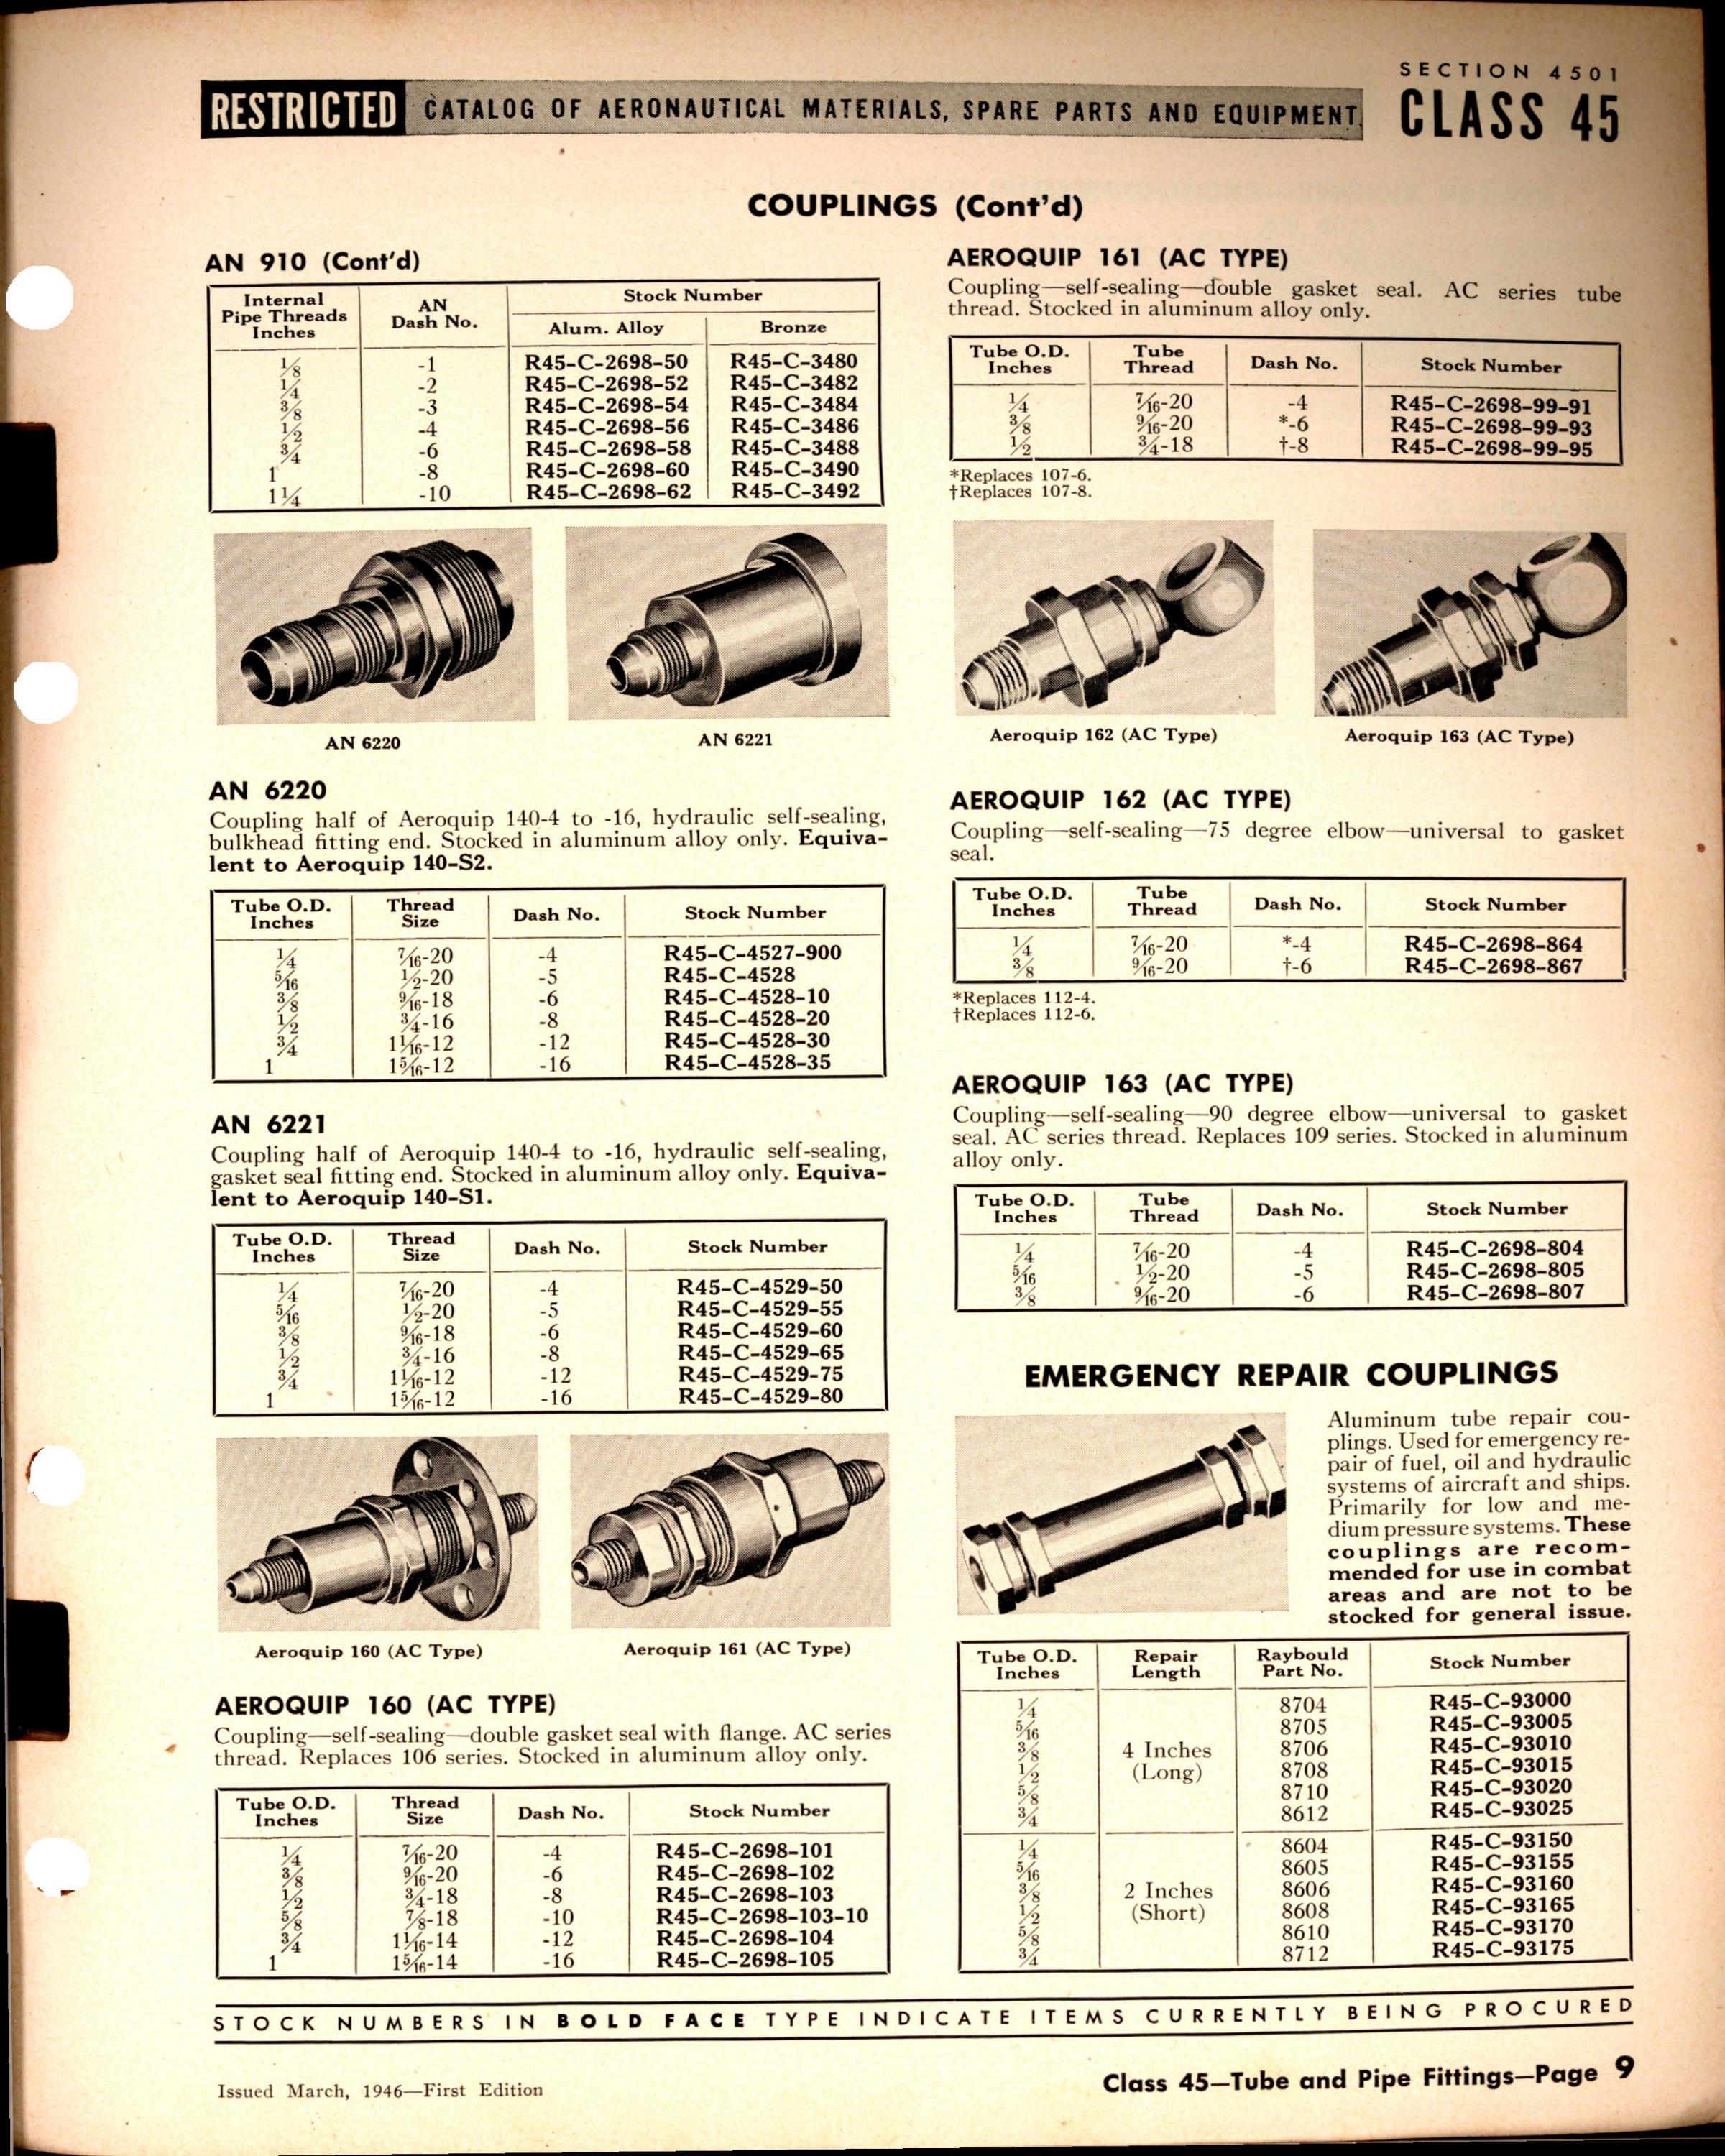 Sample page 9 from AirCorps Library document: Tube and Pipe Fittings